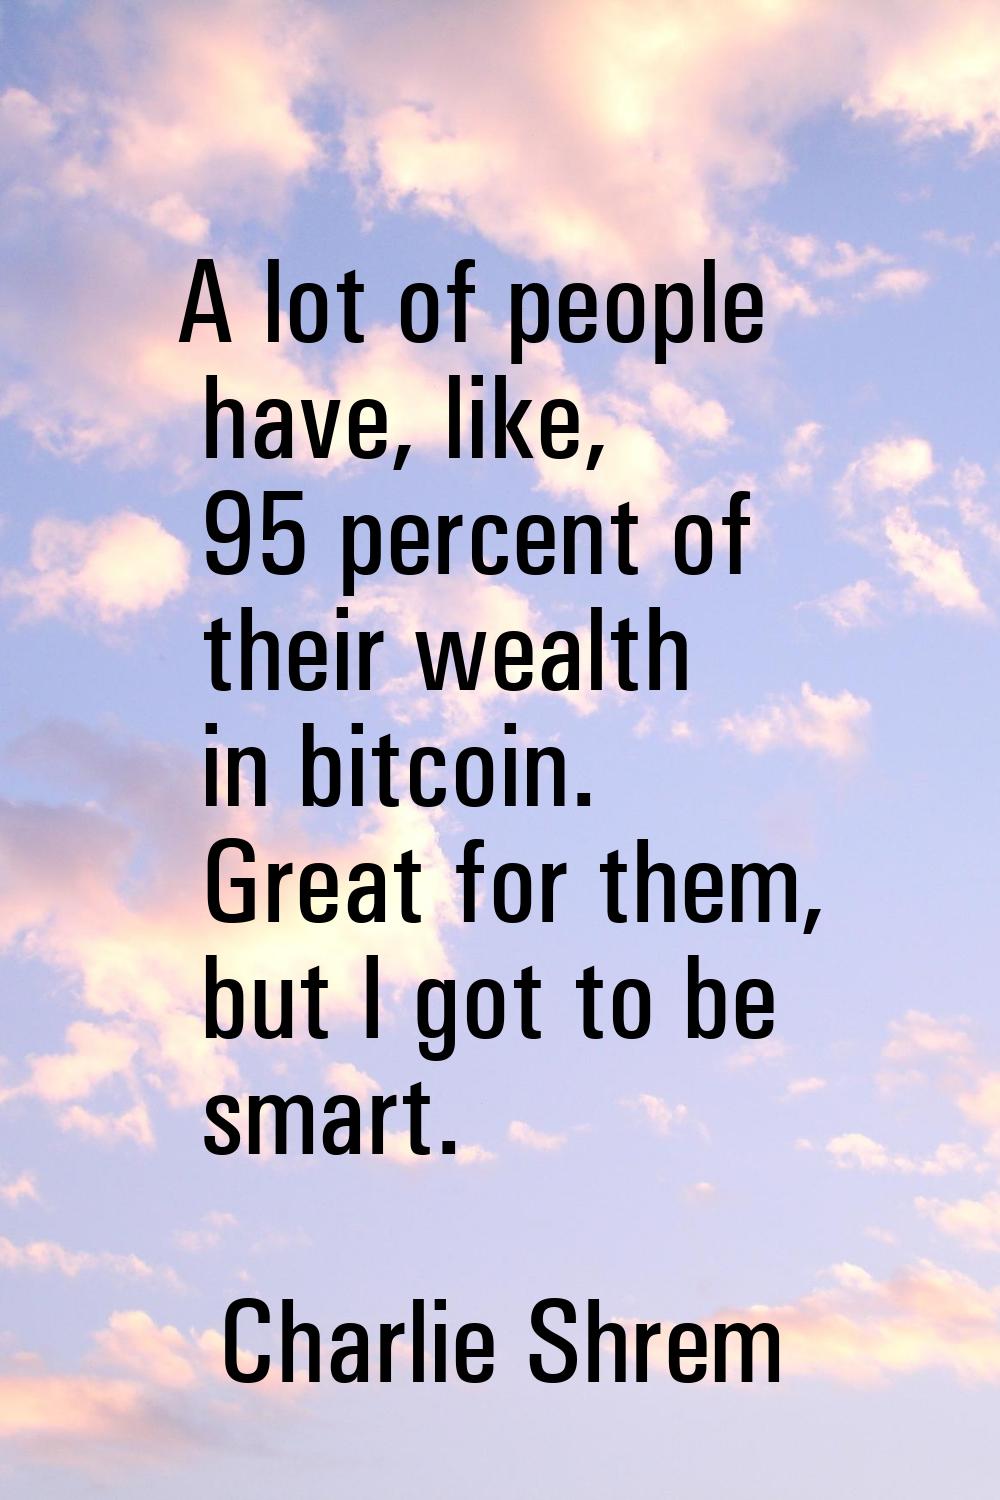 A lot of people have, like, 95 percent of their wealth in bitcoin. Great for them, but I got to be 